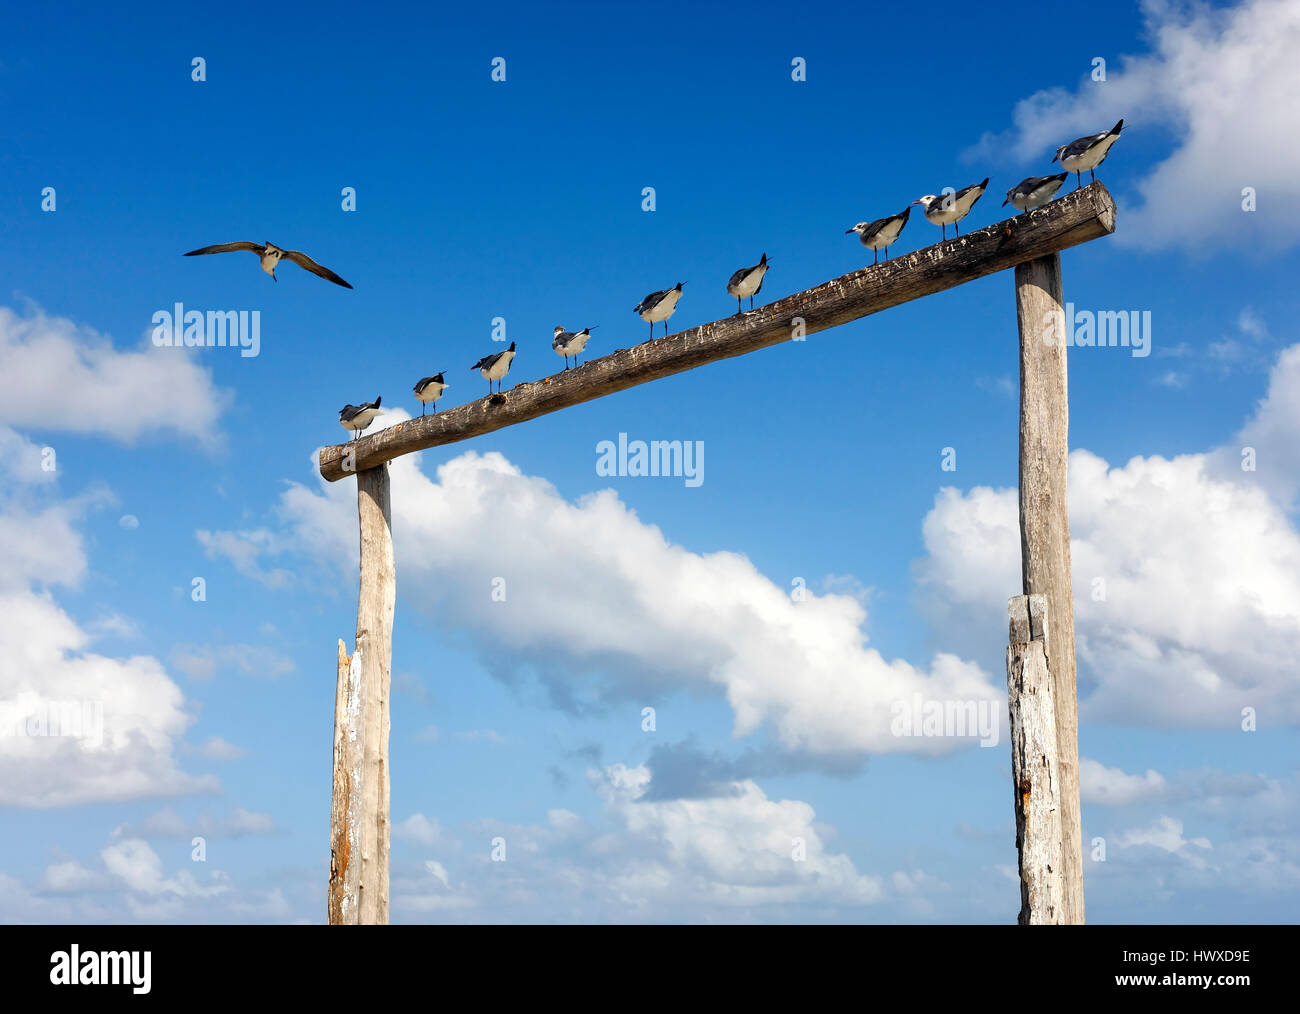 Group of seagulls resting on wooden pier in Maexico Stock Photo